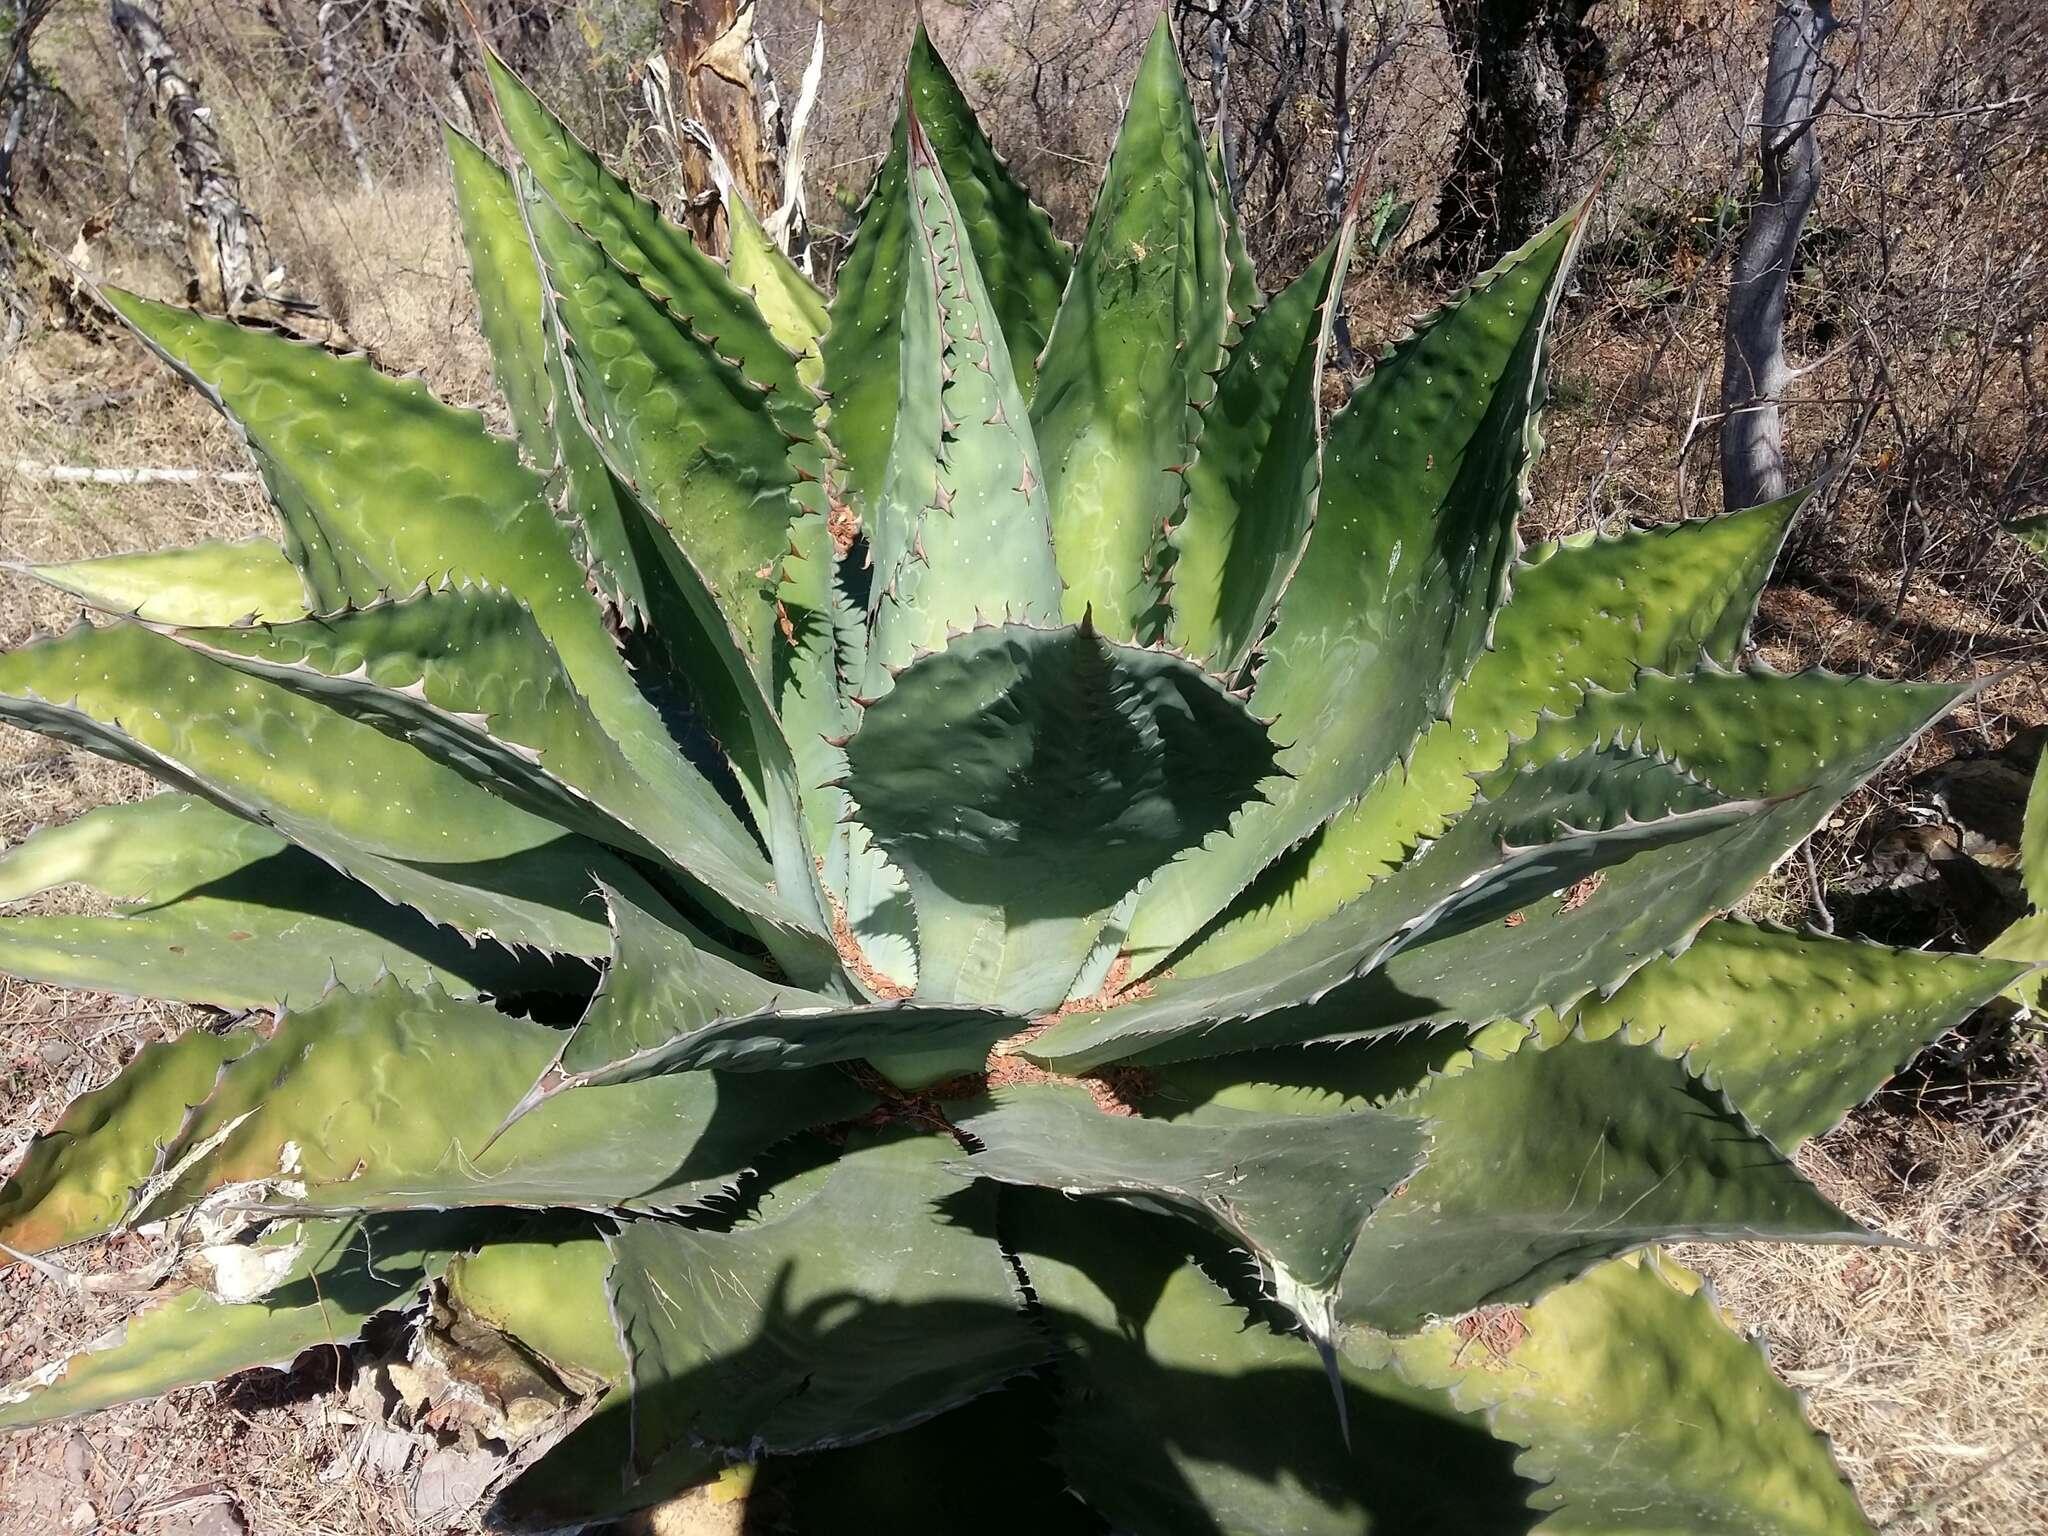 Image of Agave cupreata Trel. & A. Berger